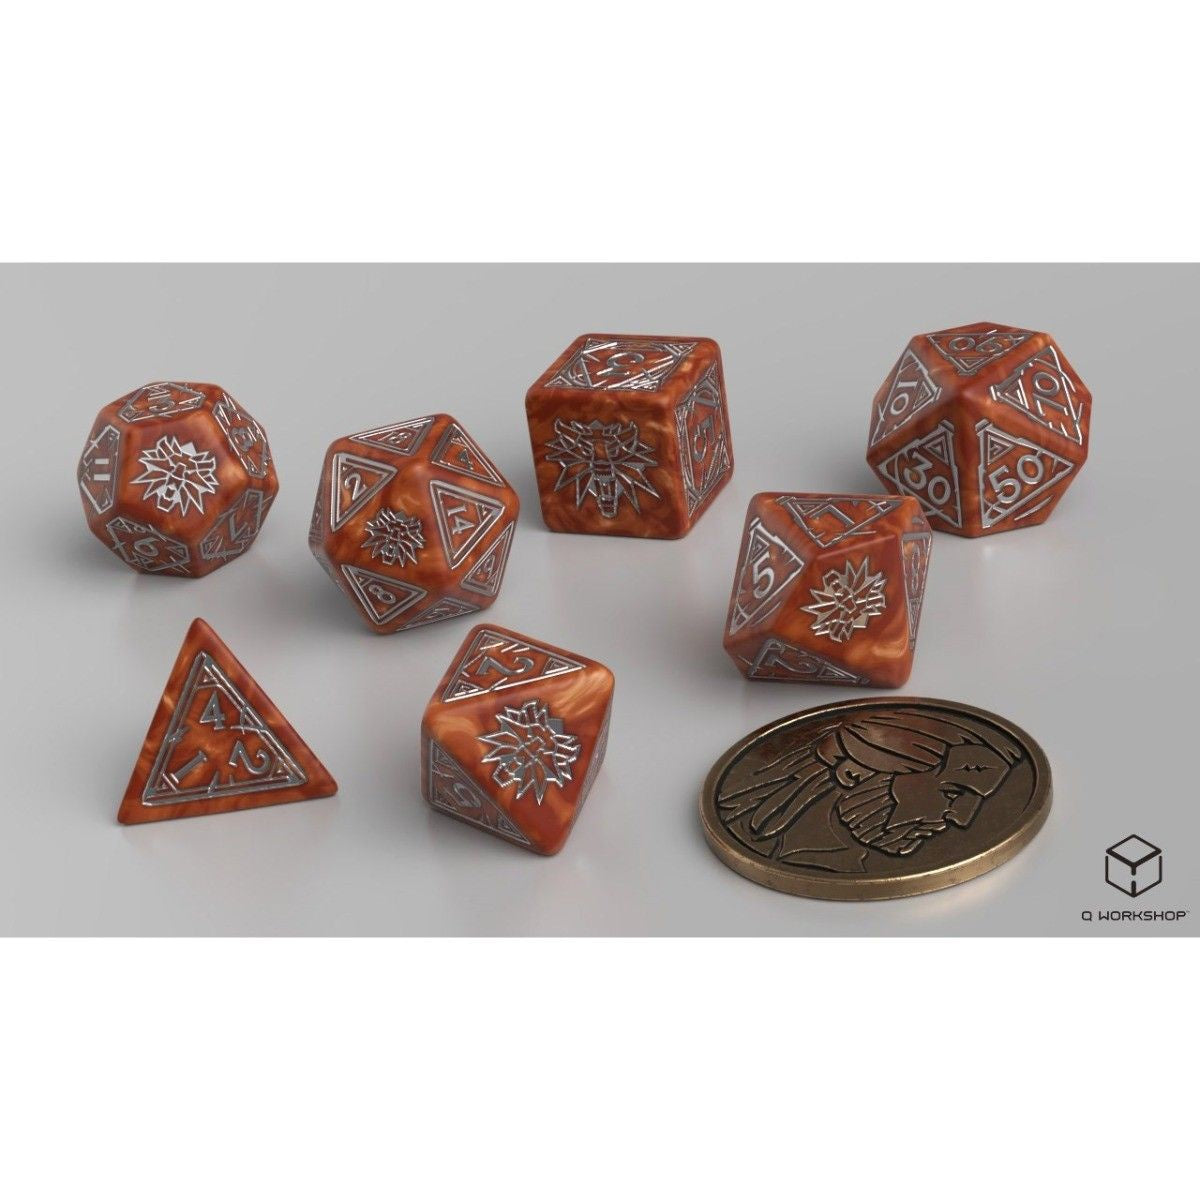 Q Workshop - The Witcher Dice - Geralt The Monster Slayer Dice set with Coin